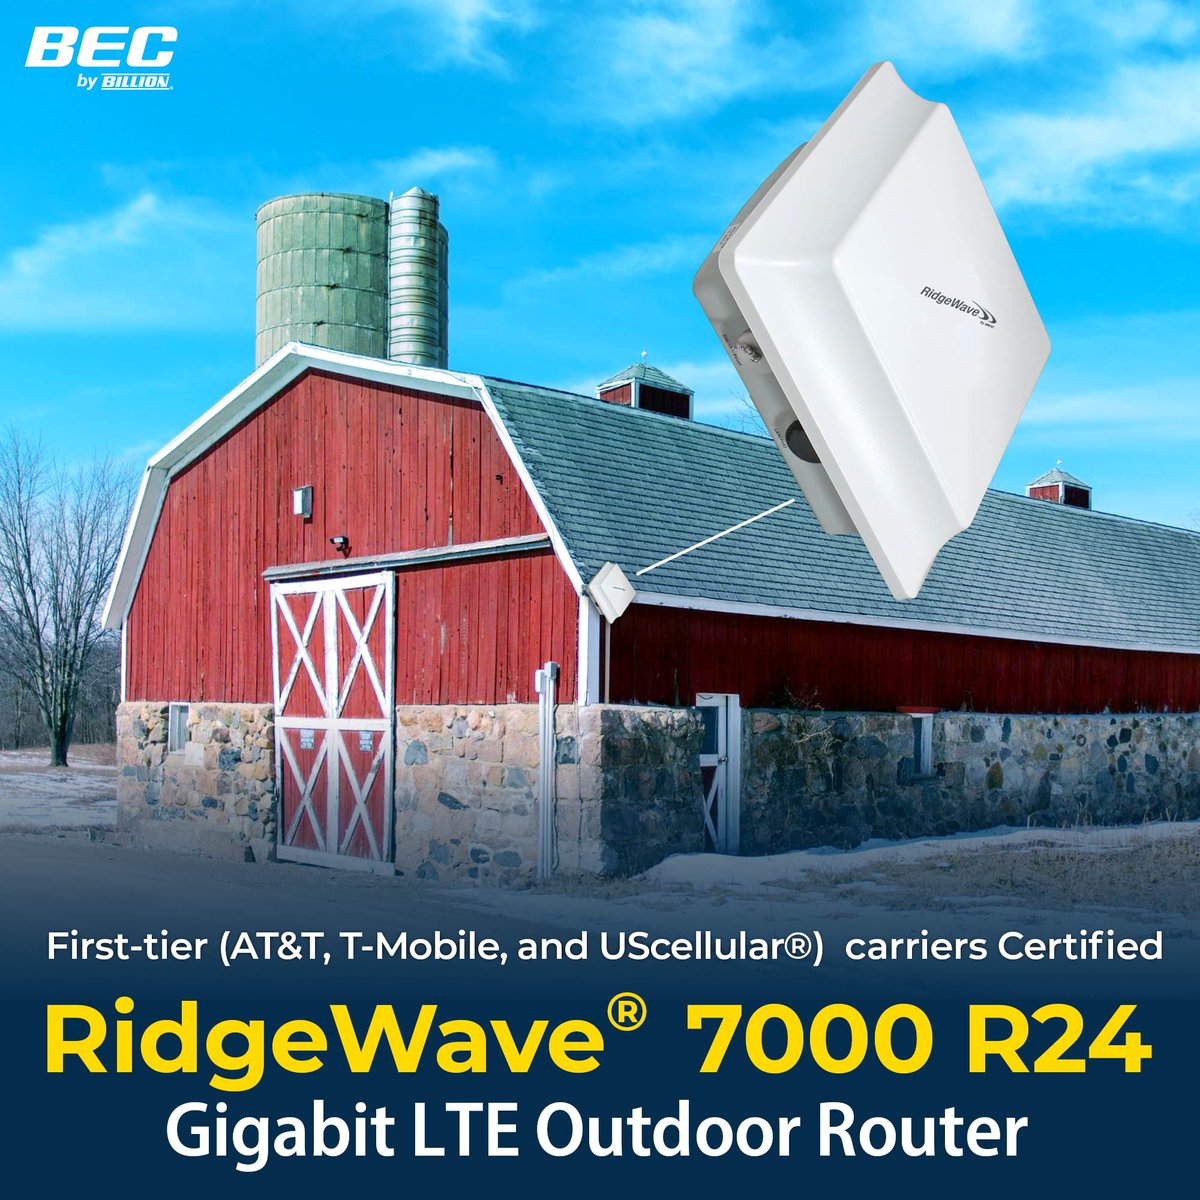 First-tier carriers (AT&T, T-Mobile, and UScellular®) certified RidgeWave® 7000 R24 offers rural internet providers delivering high-speed #fixedwireless internet throughout rural America.
Learn more at ow.ly/HAZh50JFqnu
#ruralbroadband #ISP